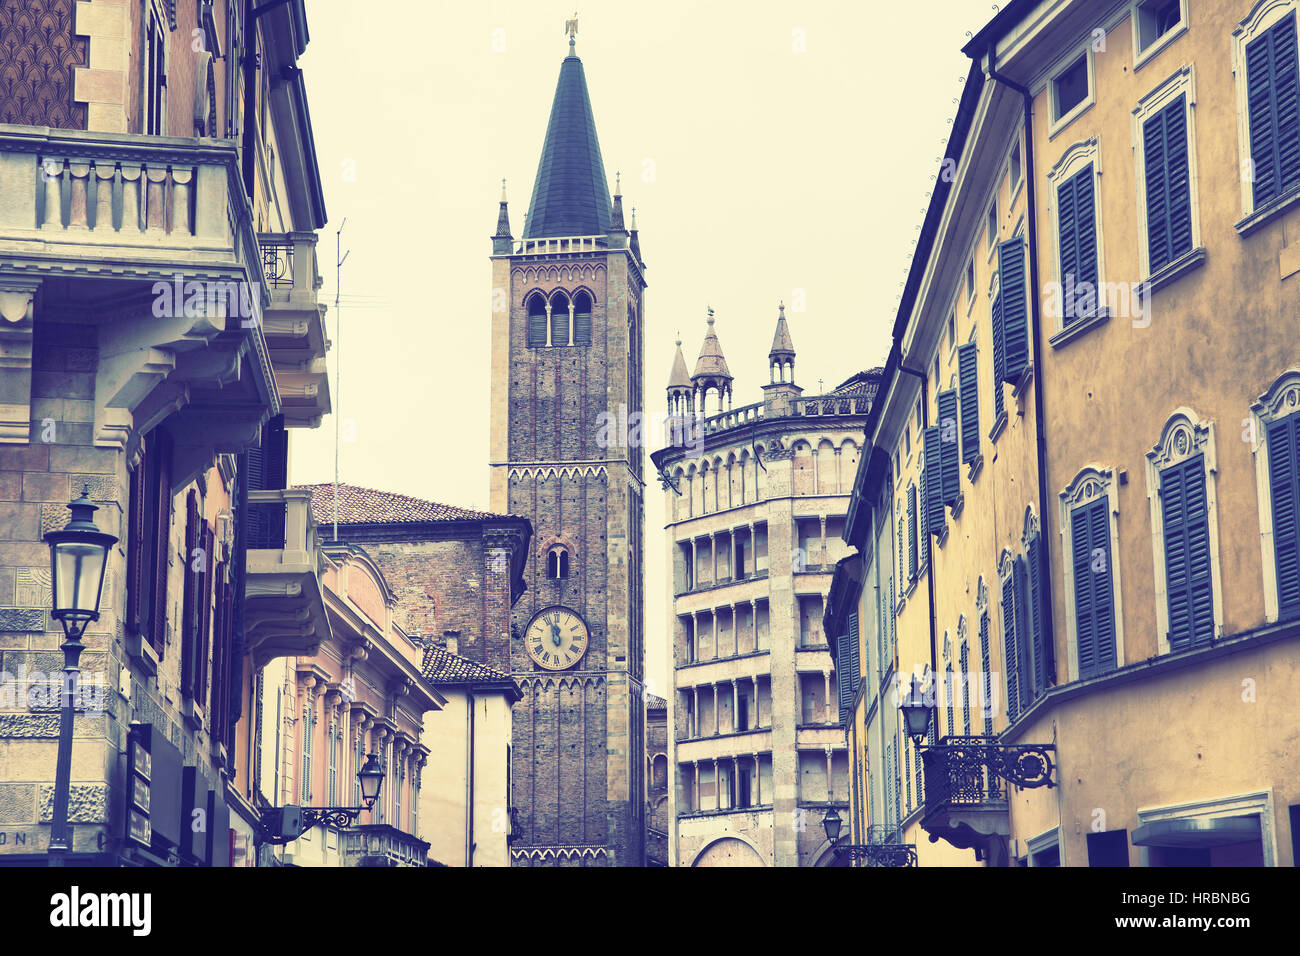 Cathedral (Duomo) and baptistery in Parma, Italy. Retro style filtered image Stock Photo